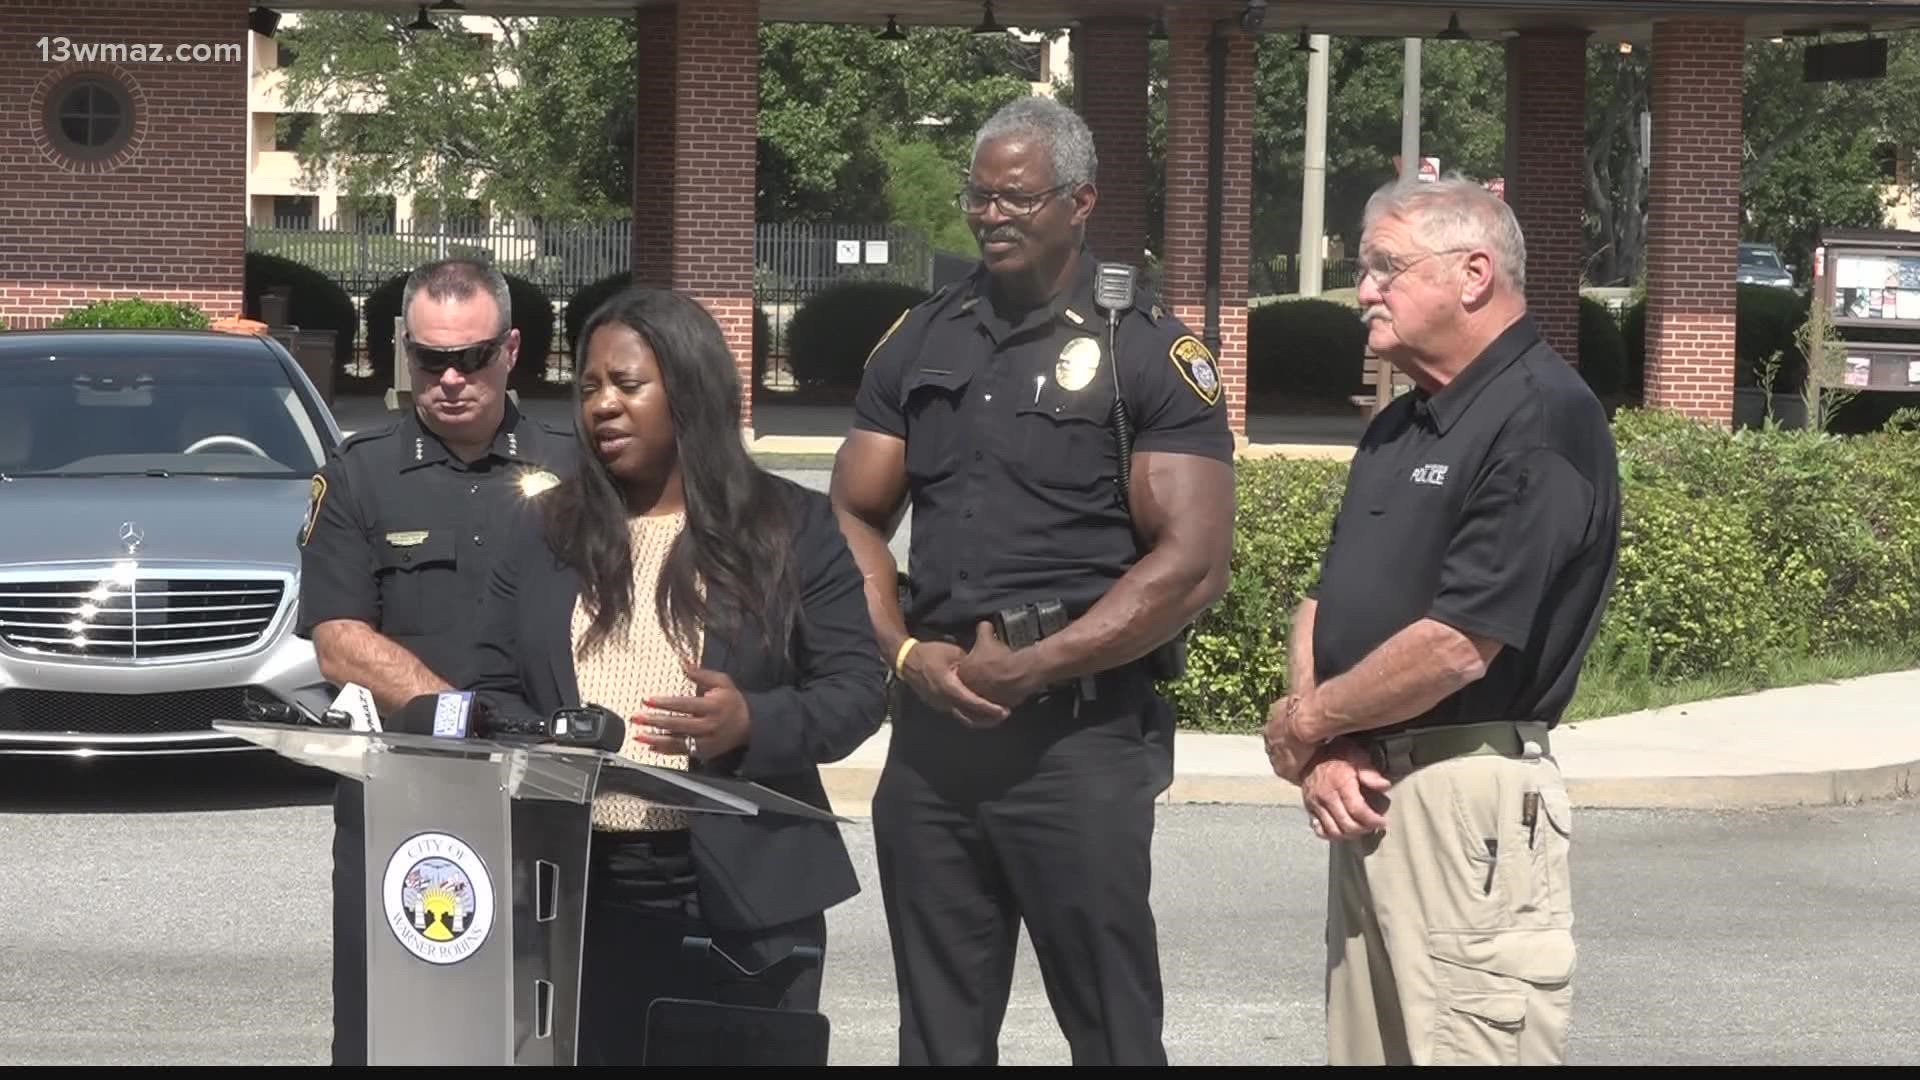 Warner Robins is looking for solutions after three homicides in three days. Tuesday night, leaders addresses the recent violence and pleaded with their community.